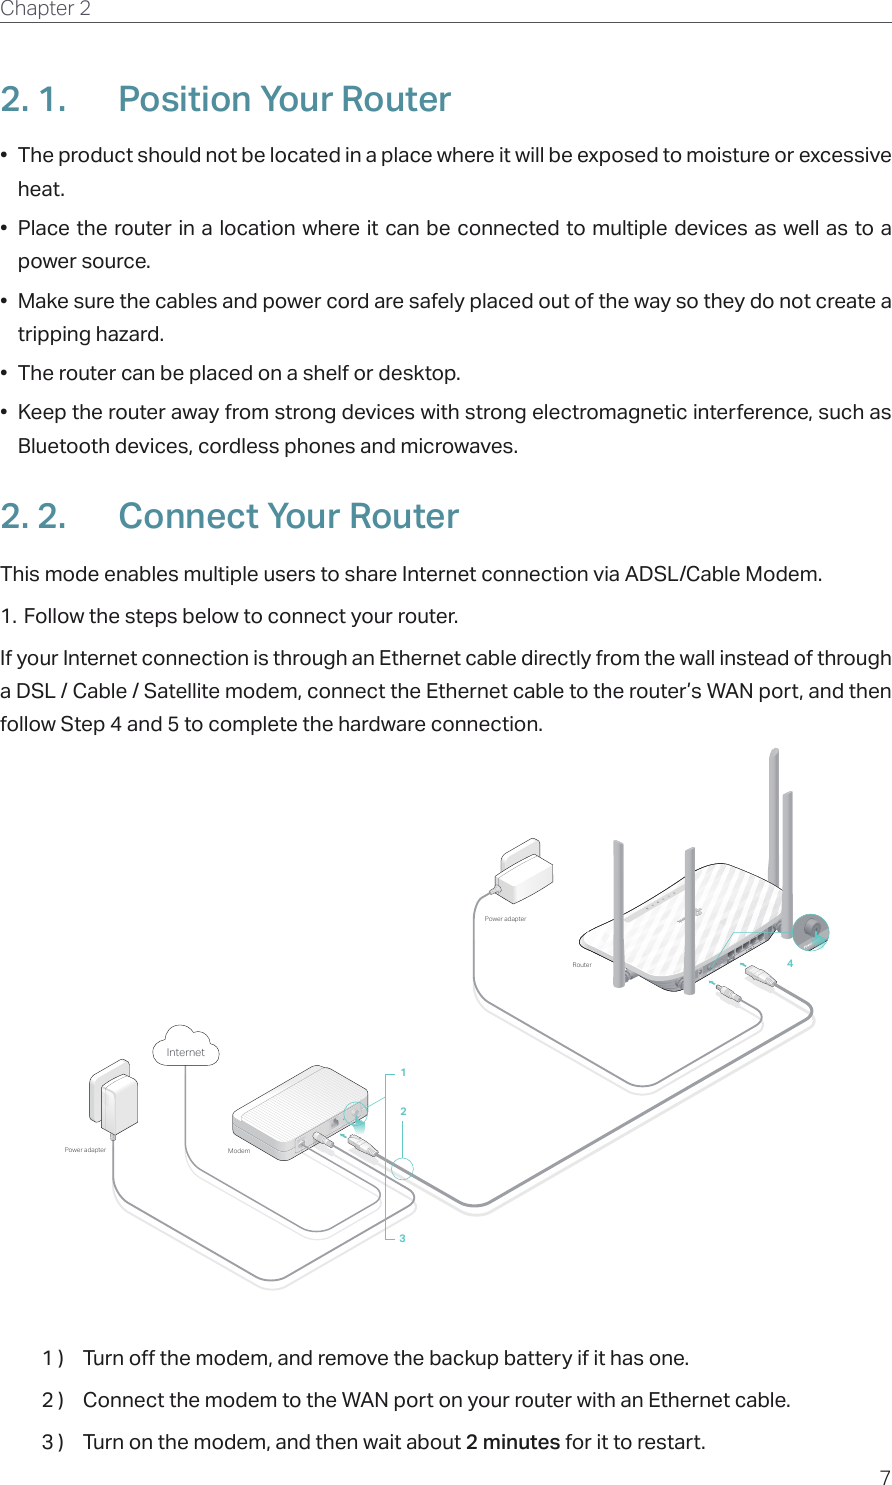 7Chapter 2  2. 1.  Position Your Router•  The product should not be located in a place where it will be exposed to moisture or excessive heat.•  Place the router in a location where it can be connected to multiple devices as well as to a power source.•  Make sure the cables and power cord are safely placed out of the way so they do not create a tripping hazard.•  The router can be placed on a shelf or desktop.•  Keep the router away from strong devices with strong electromagnetic interference, such as Bluetooth devices, cordless phones and microwaves.2. 2.  Connect Your RouterThis mode enables multiple users to share Internet connection via ADSL/Cable Modem.1. Follow the steps below to connect your router.If your Internet connection is through an Ethernet cable directly from the wall instead of through a DSL / Cable / Satellite modem, connect the Ethernet cable to the router’s WAN port, and then follow Step 4 and 5 to complete the hardware connection.1234ModemPower adapterPower adapterInternetRouter1 )  Turn off the modem, and remove the backup battery if it has one.2 )  Connect the modem to the WAN port on your router with an Ethernet cable.3 )  Turn on the modem, and then wait about 2 minutes for it to restart.